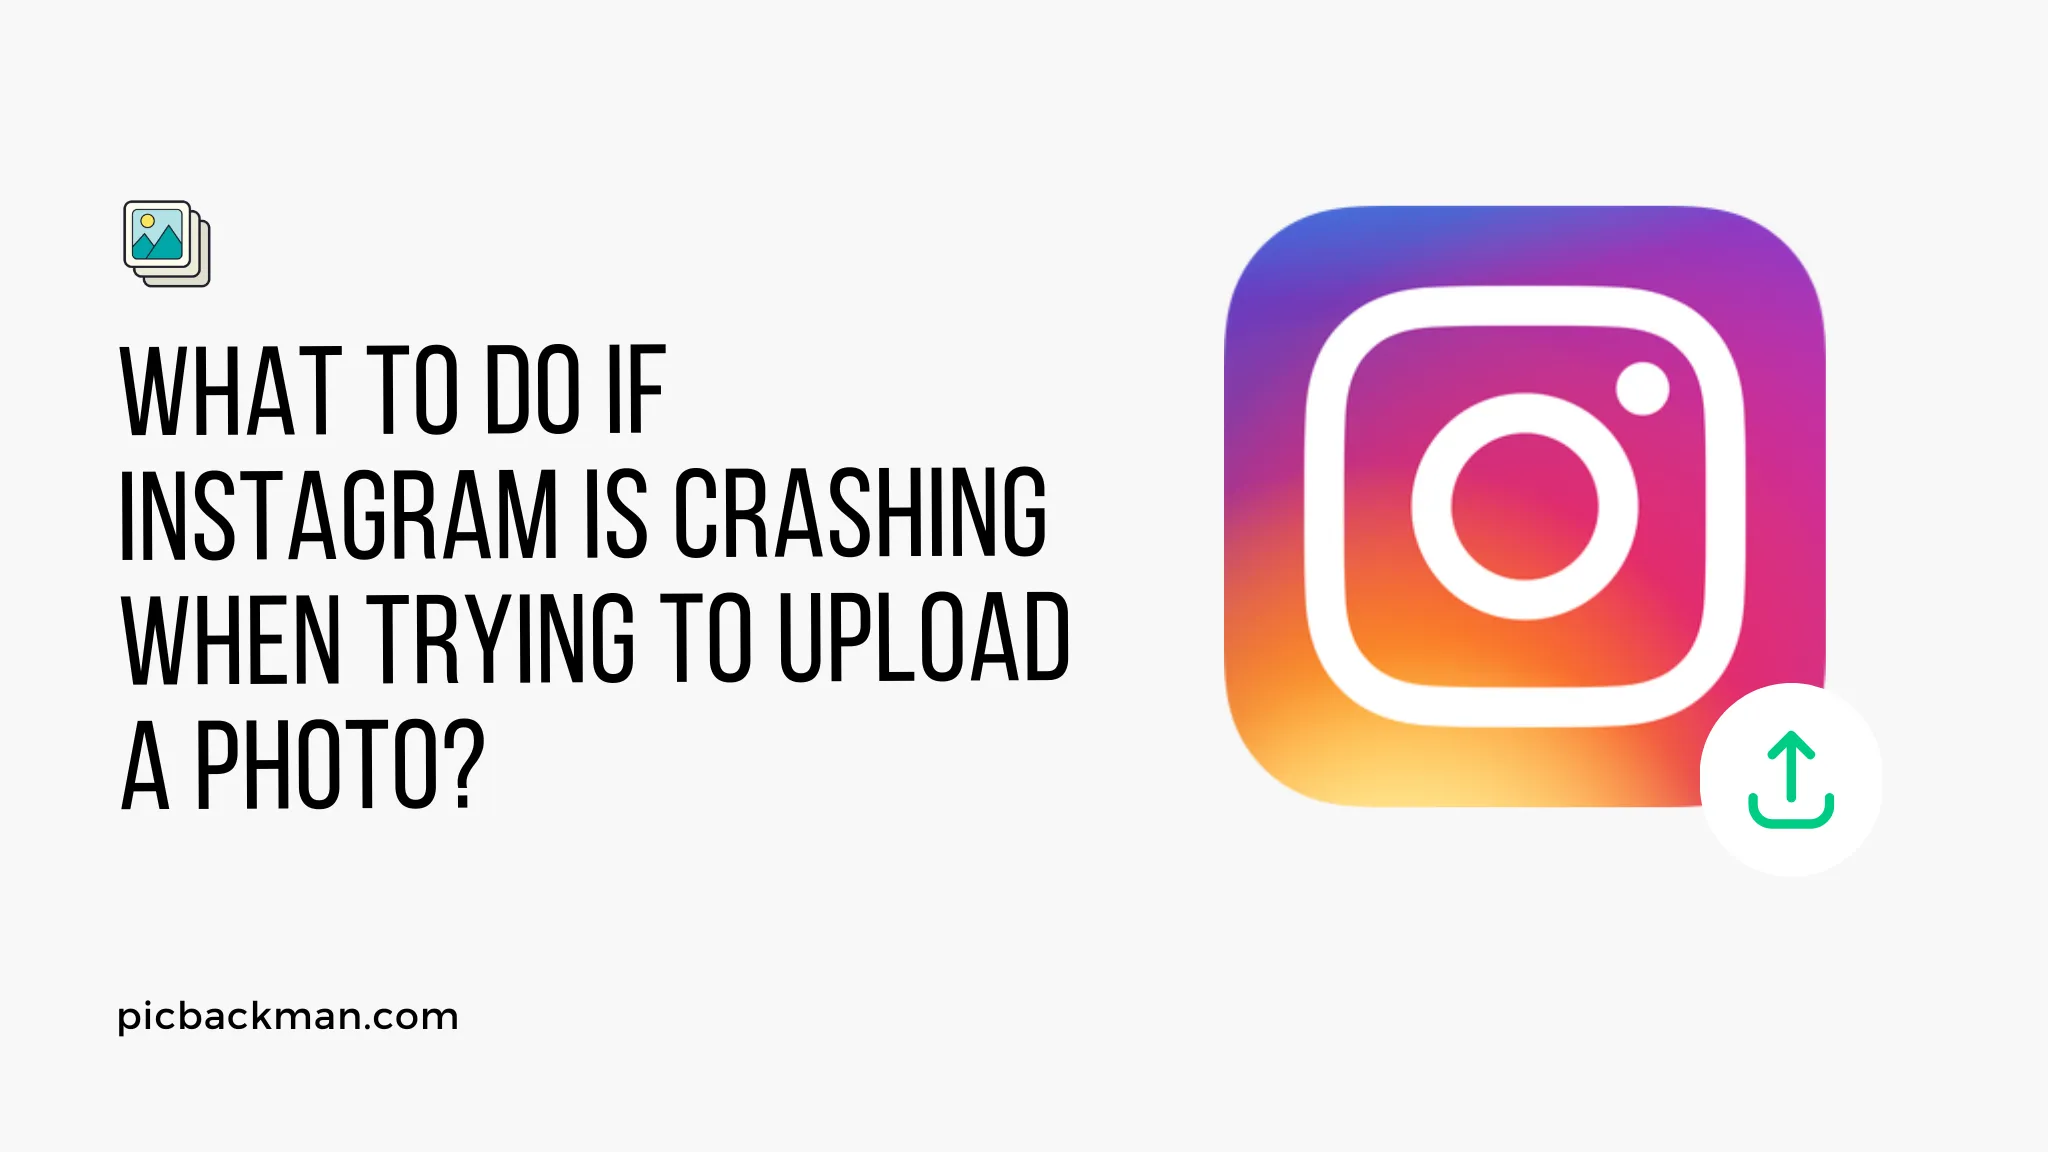 What to do if Instagram is Crashing when trying to Upload a Photo